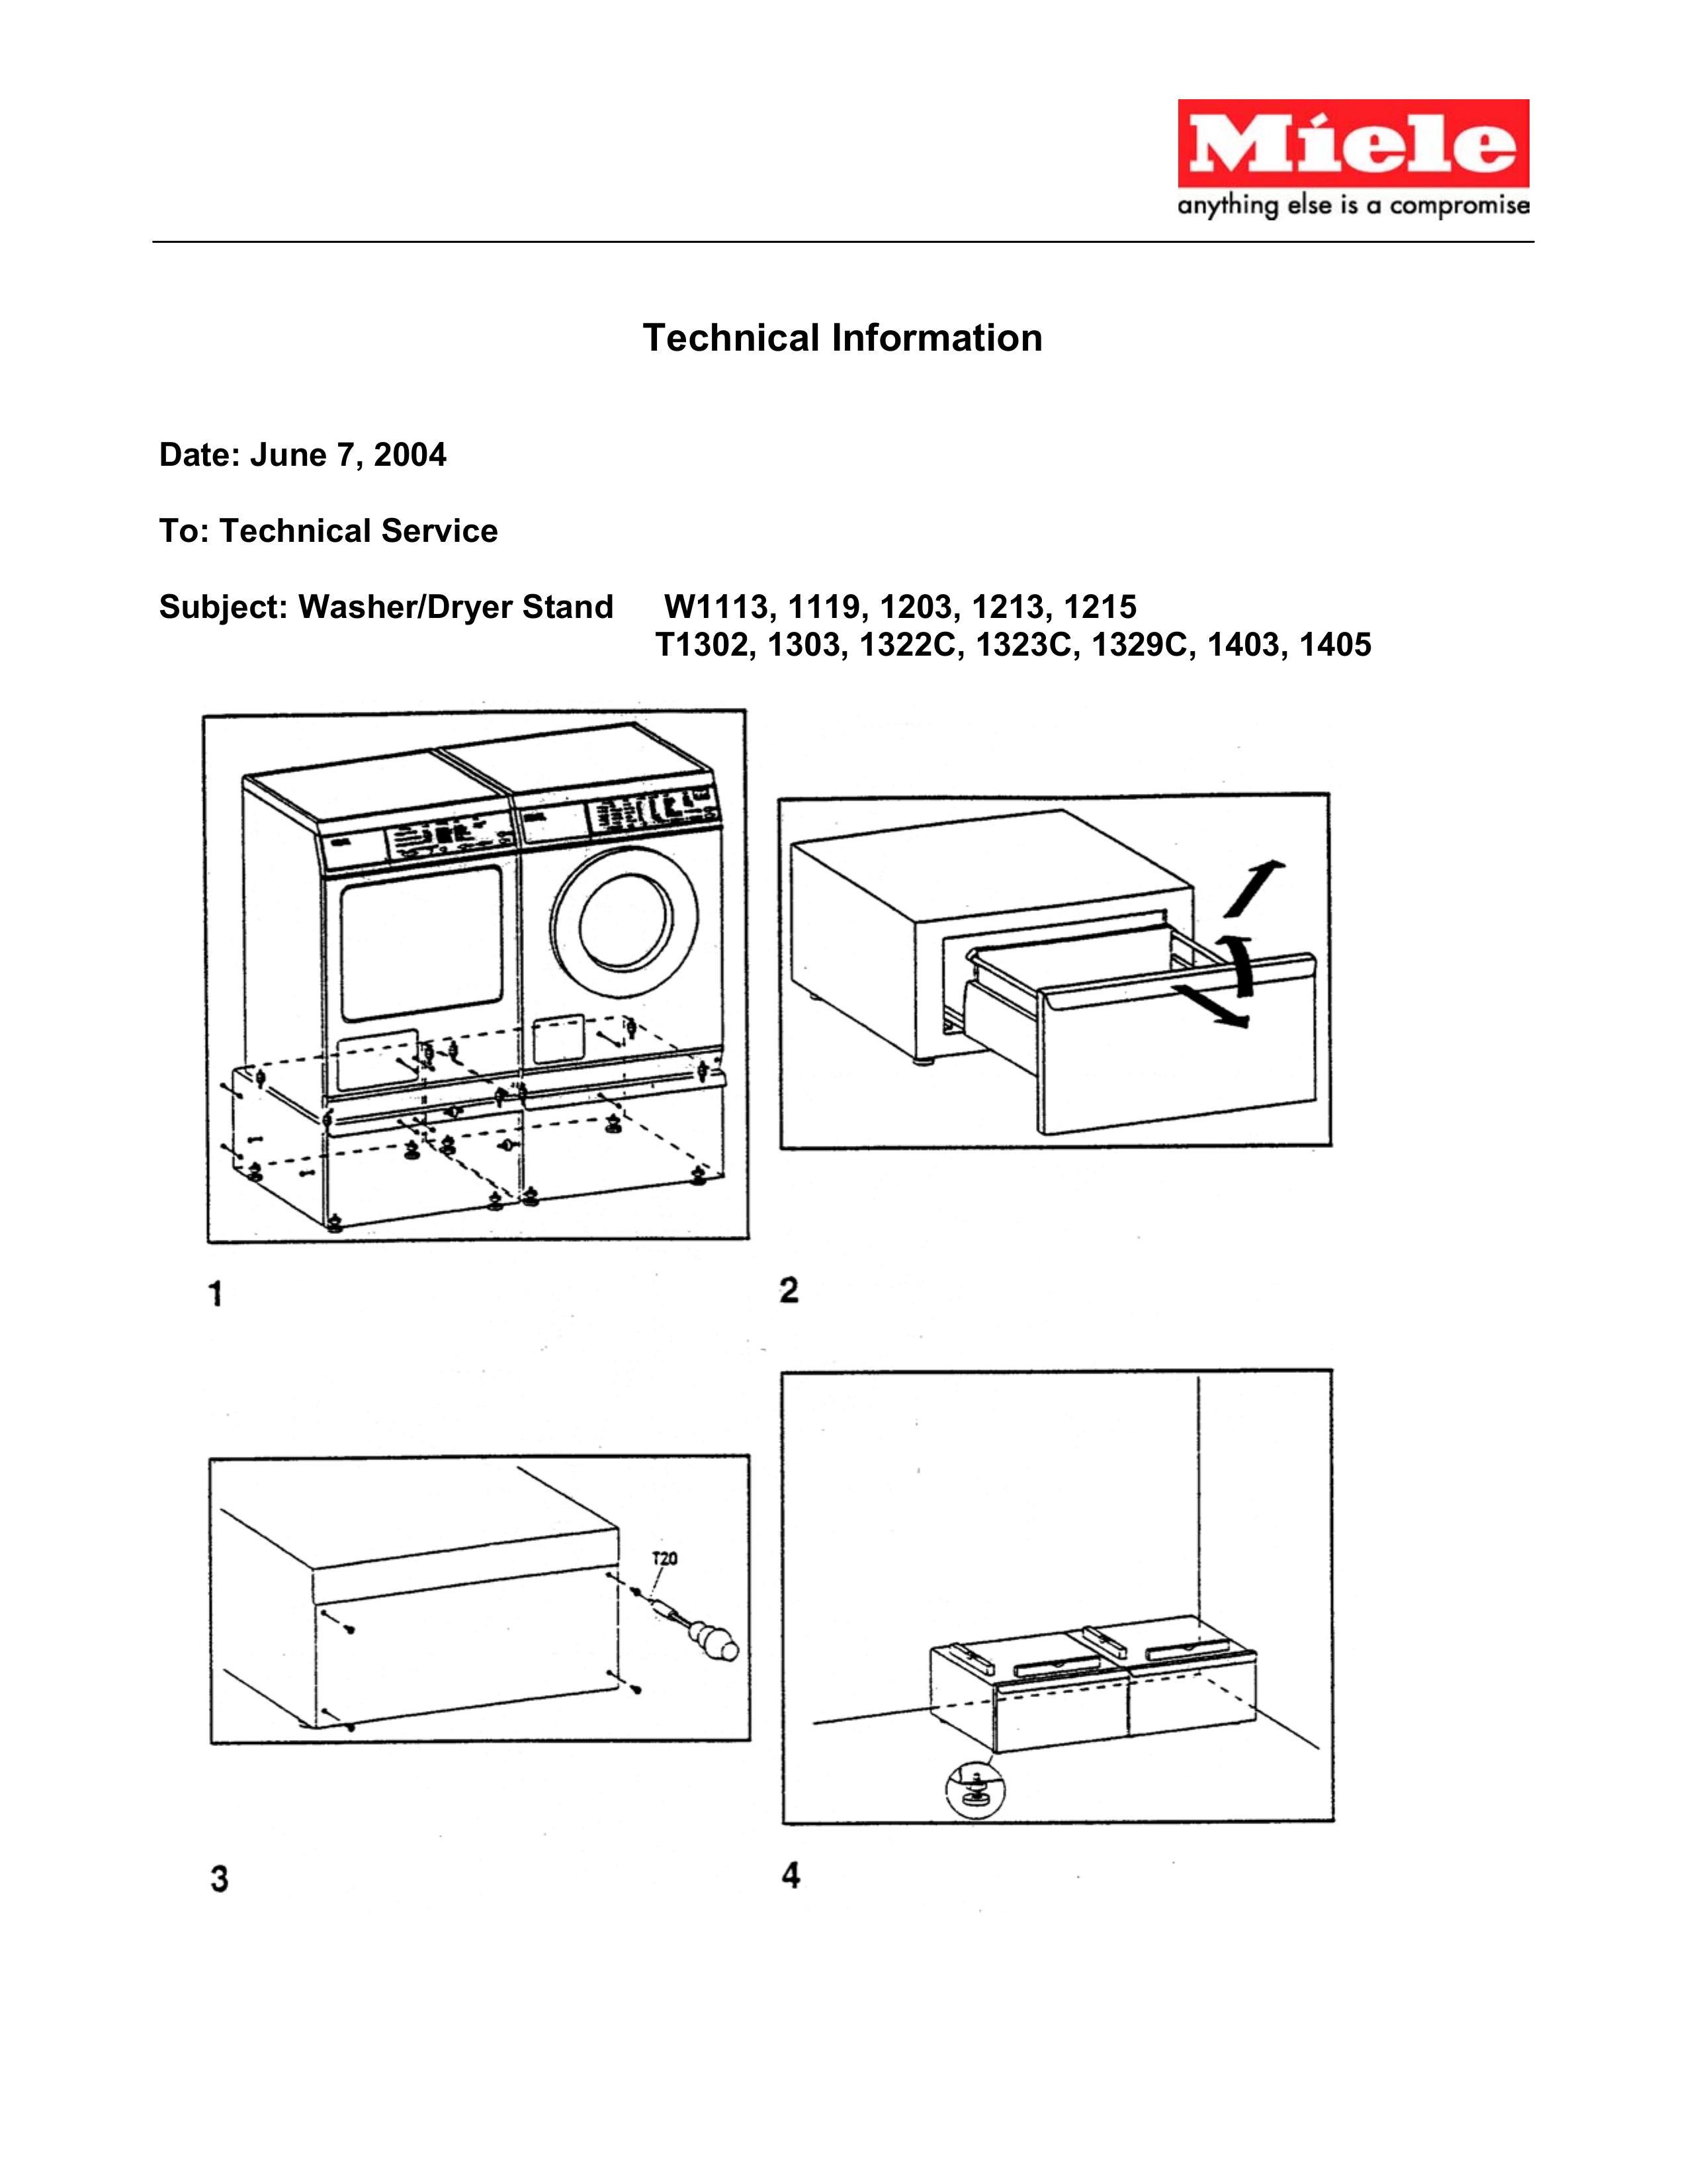 Miele W1113 Washer Accessories User Manual